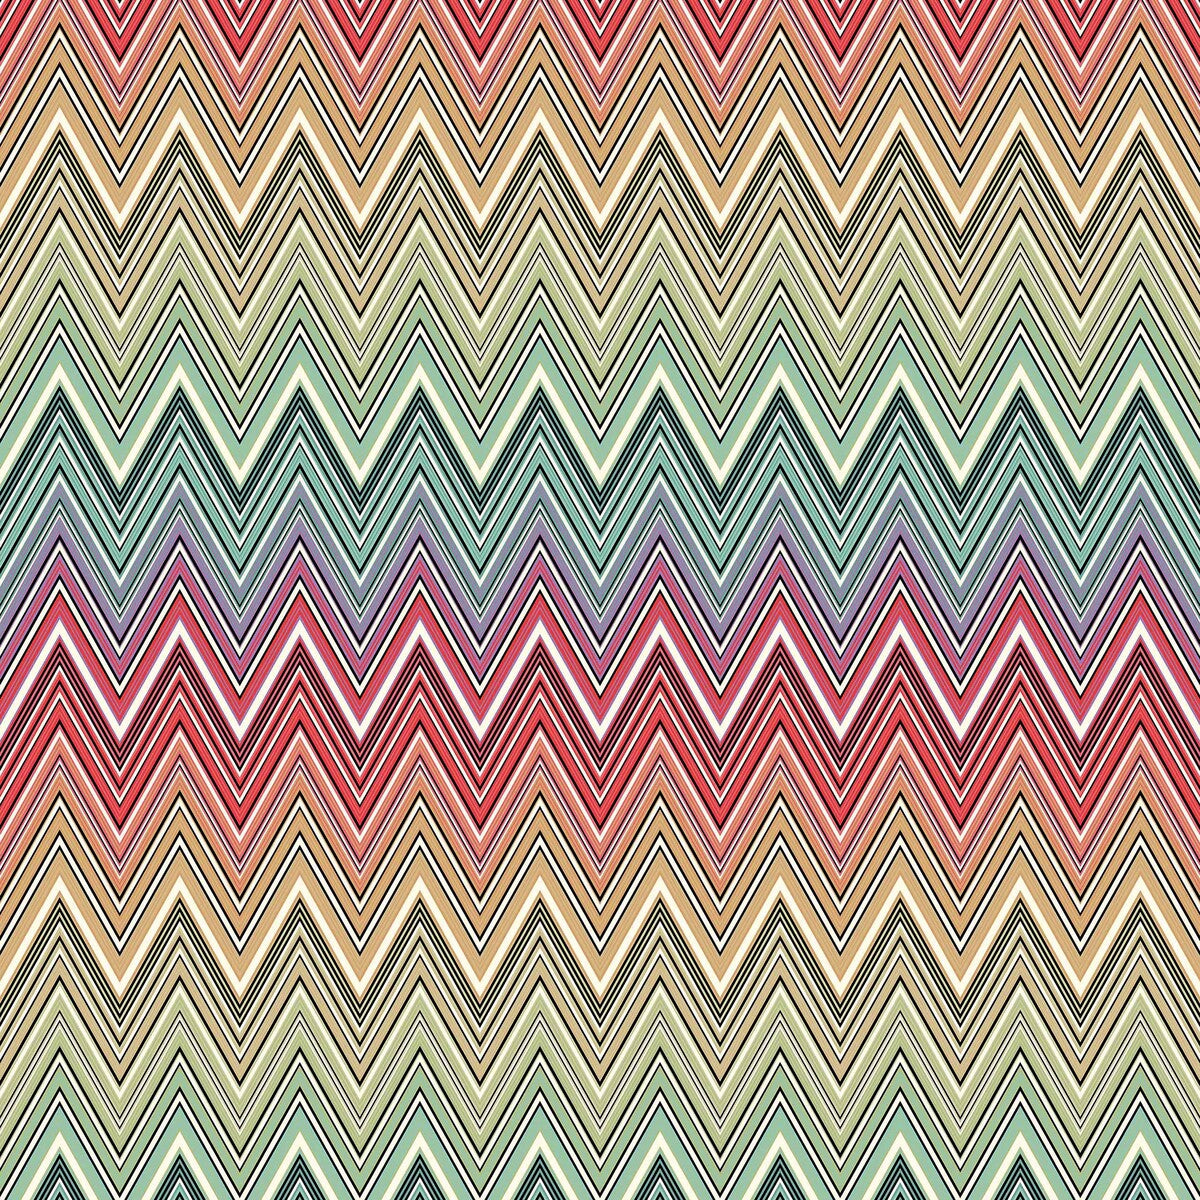 Kew Mtc Outdoor fabric in 100 color - pattern 36164.3524.0 - by Kravet Couture in the Missoni Home collection